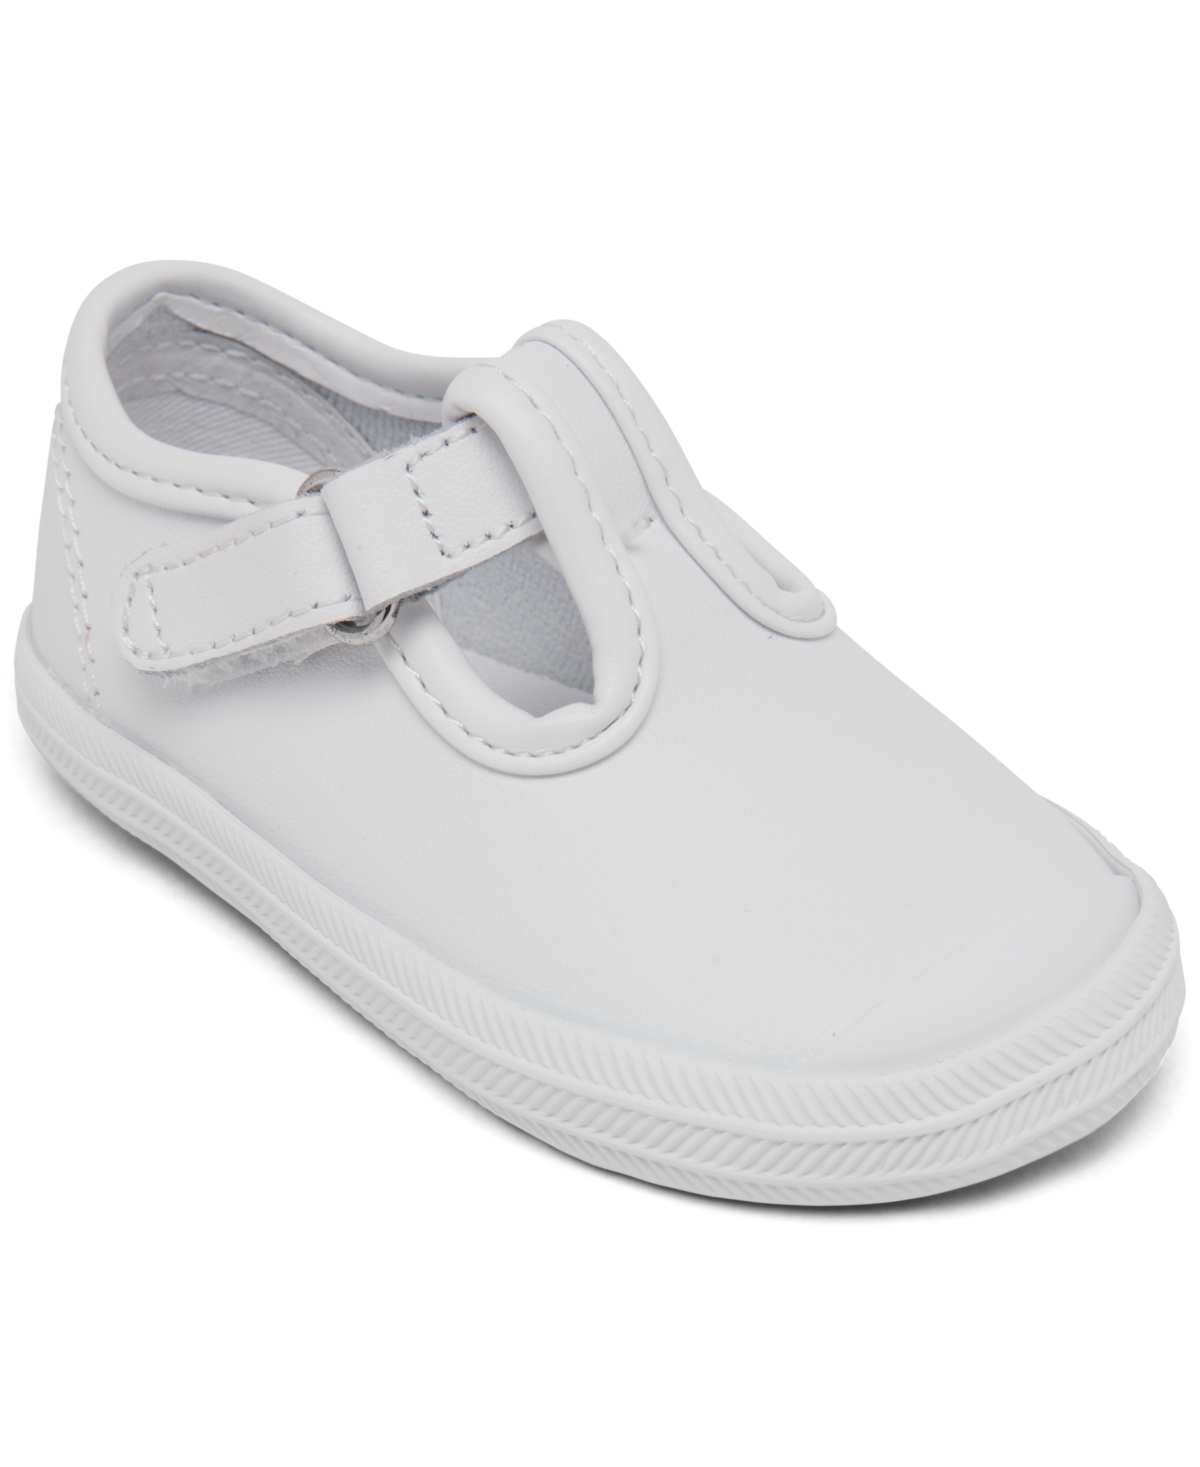 UPC 044214157136 product image for Keds Baby Girls' Champion Originals T-Strap Slip-On Casual Sneakers from Finish  | upcitemdb.com